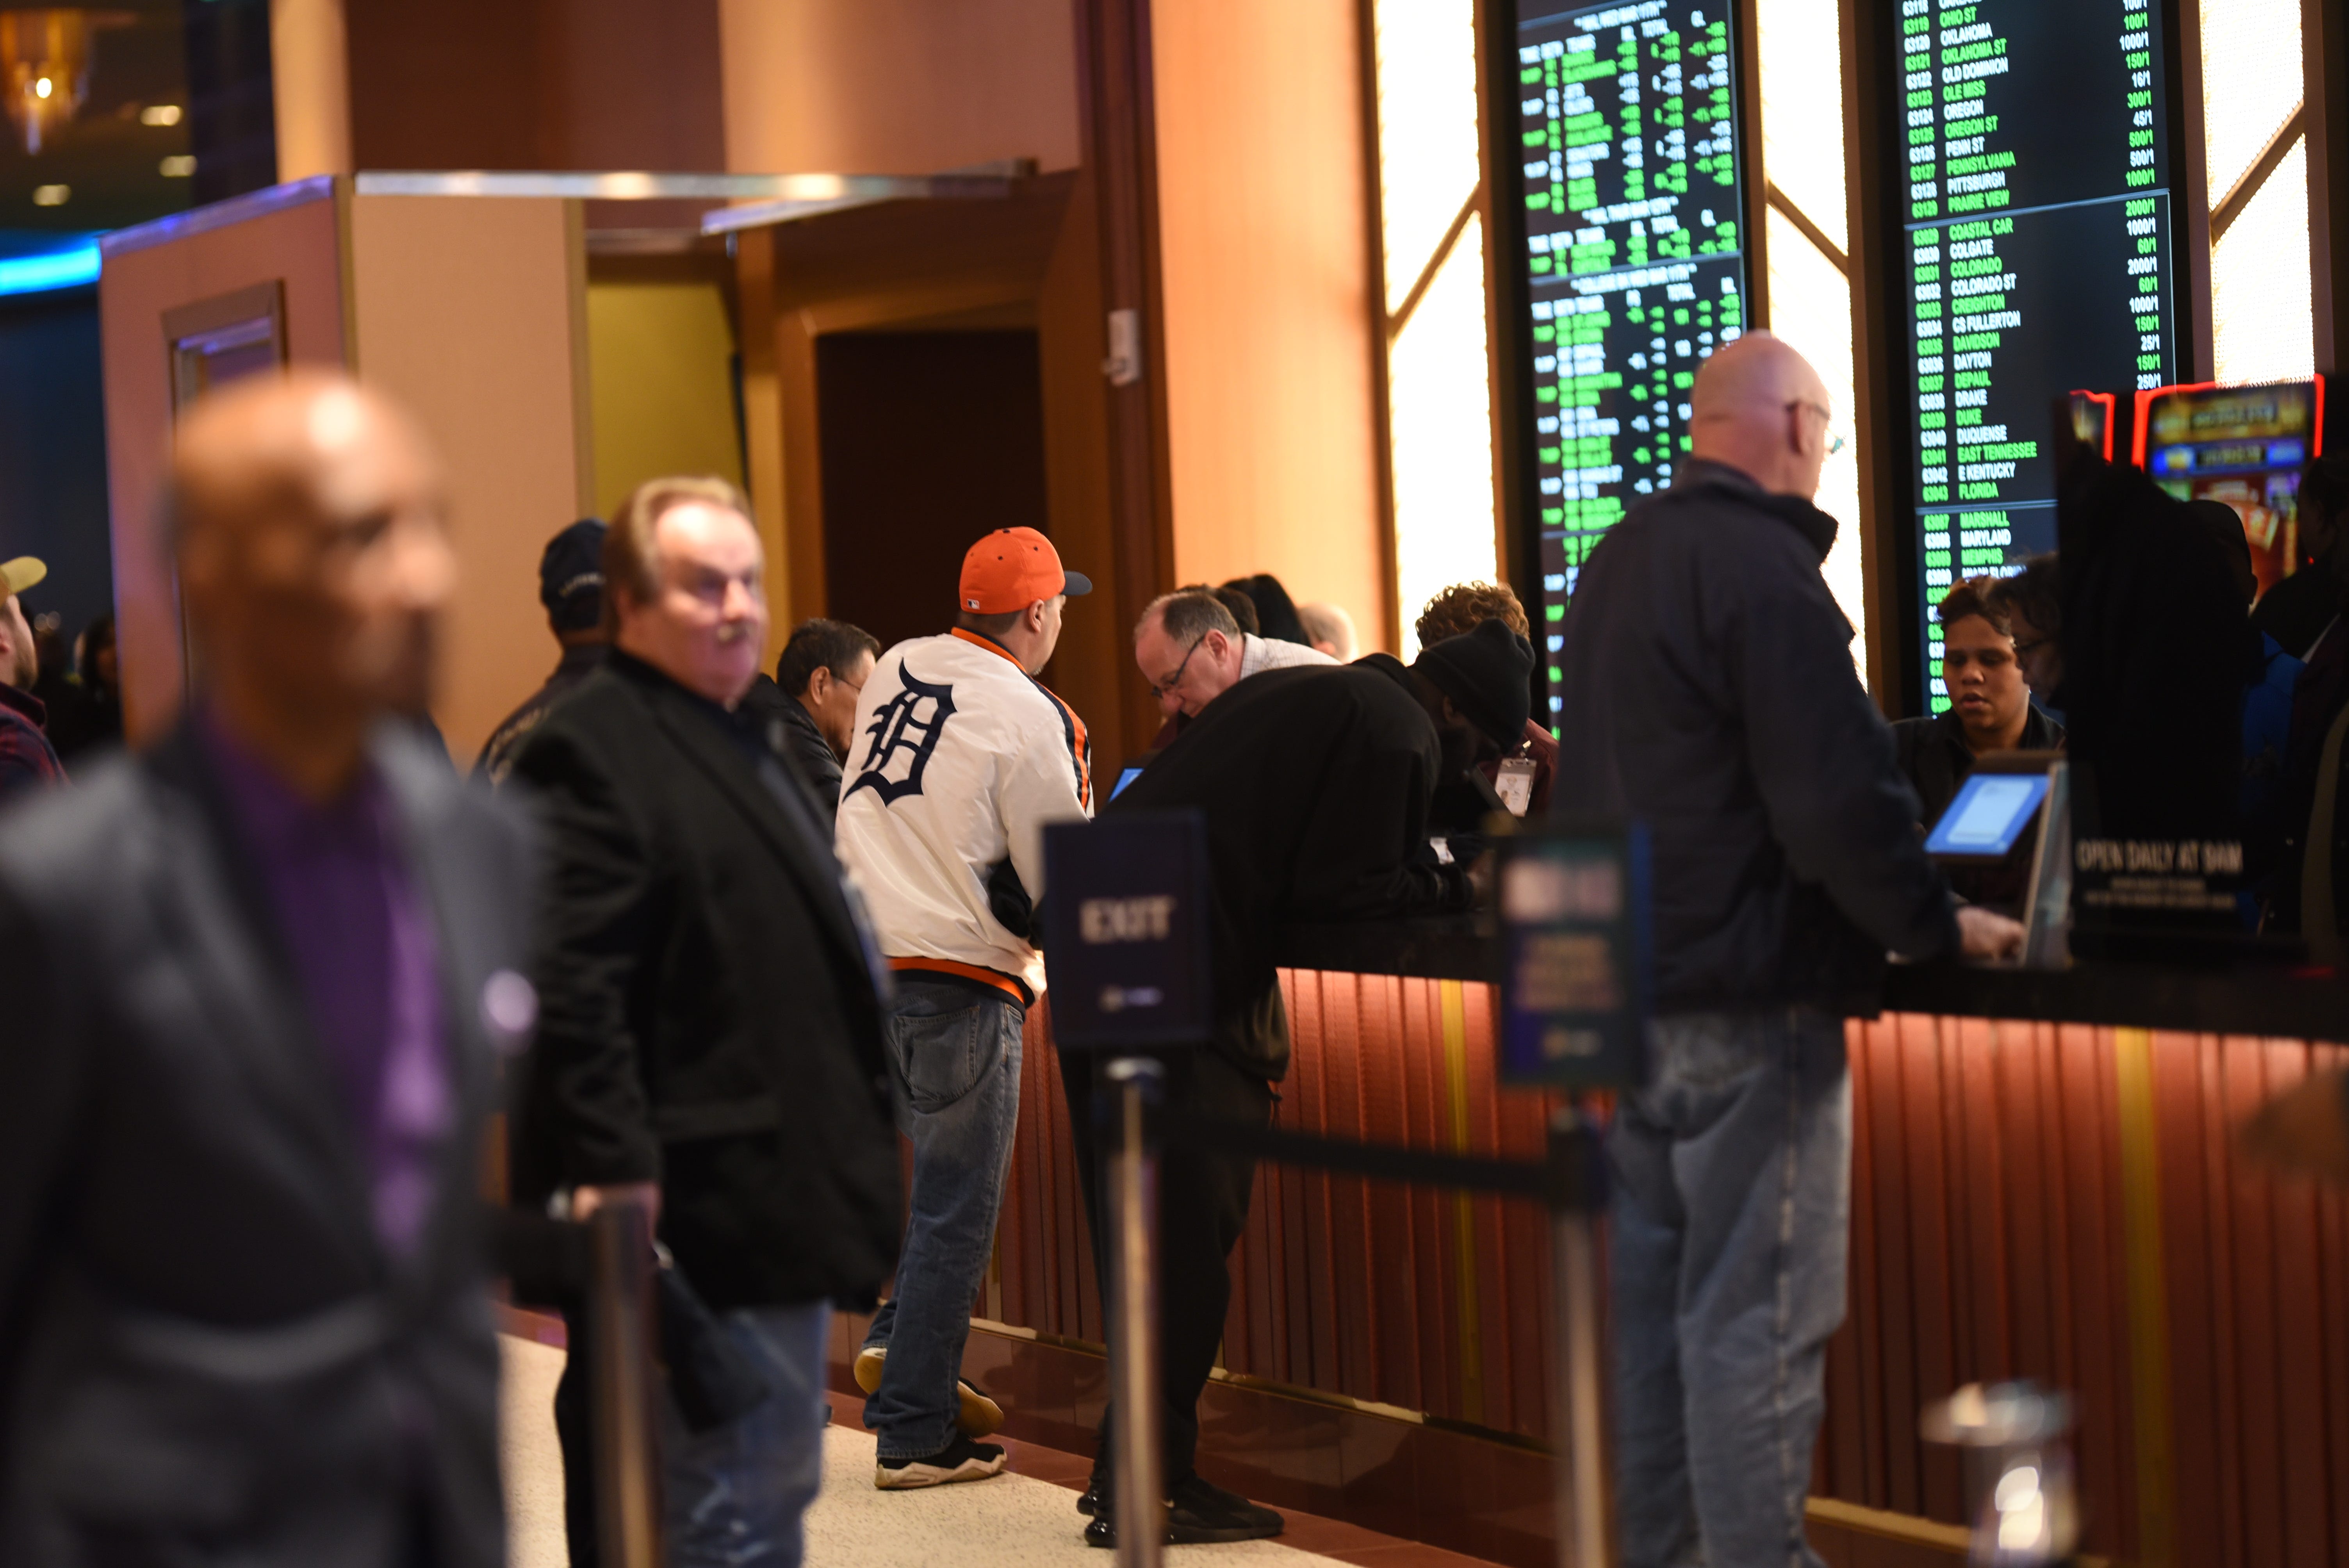 People placed their bets on the first day of sports betting at the MGM Grand.